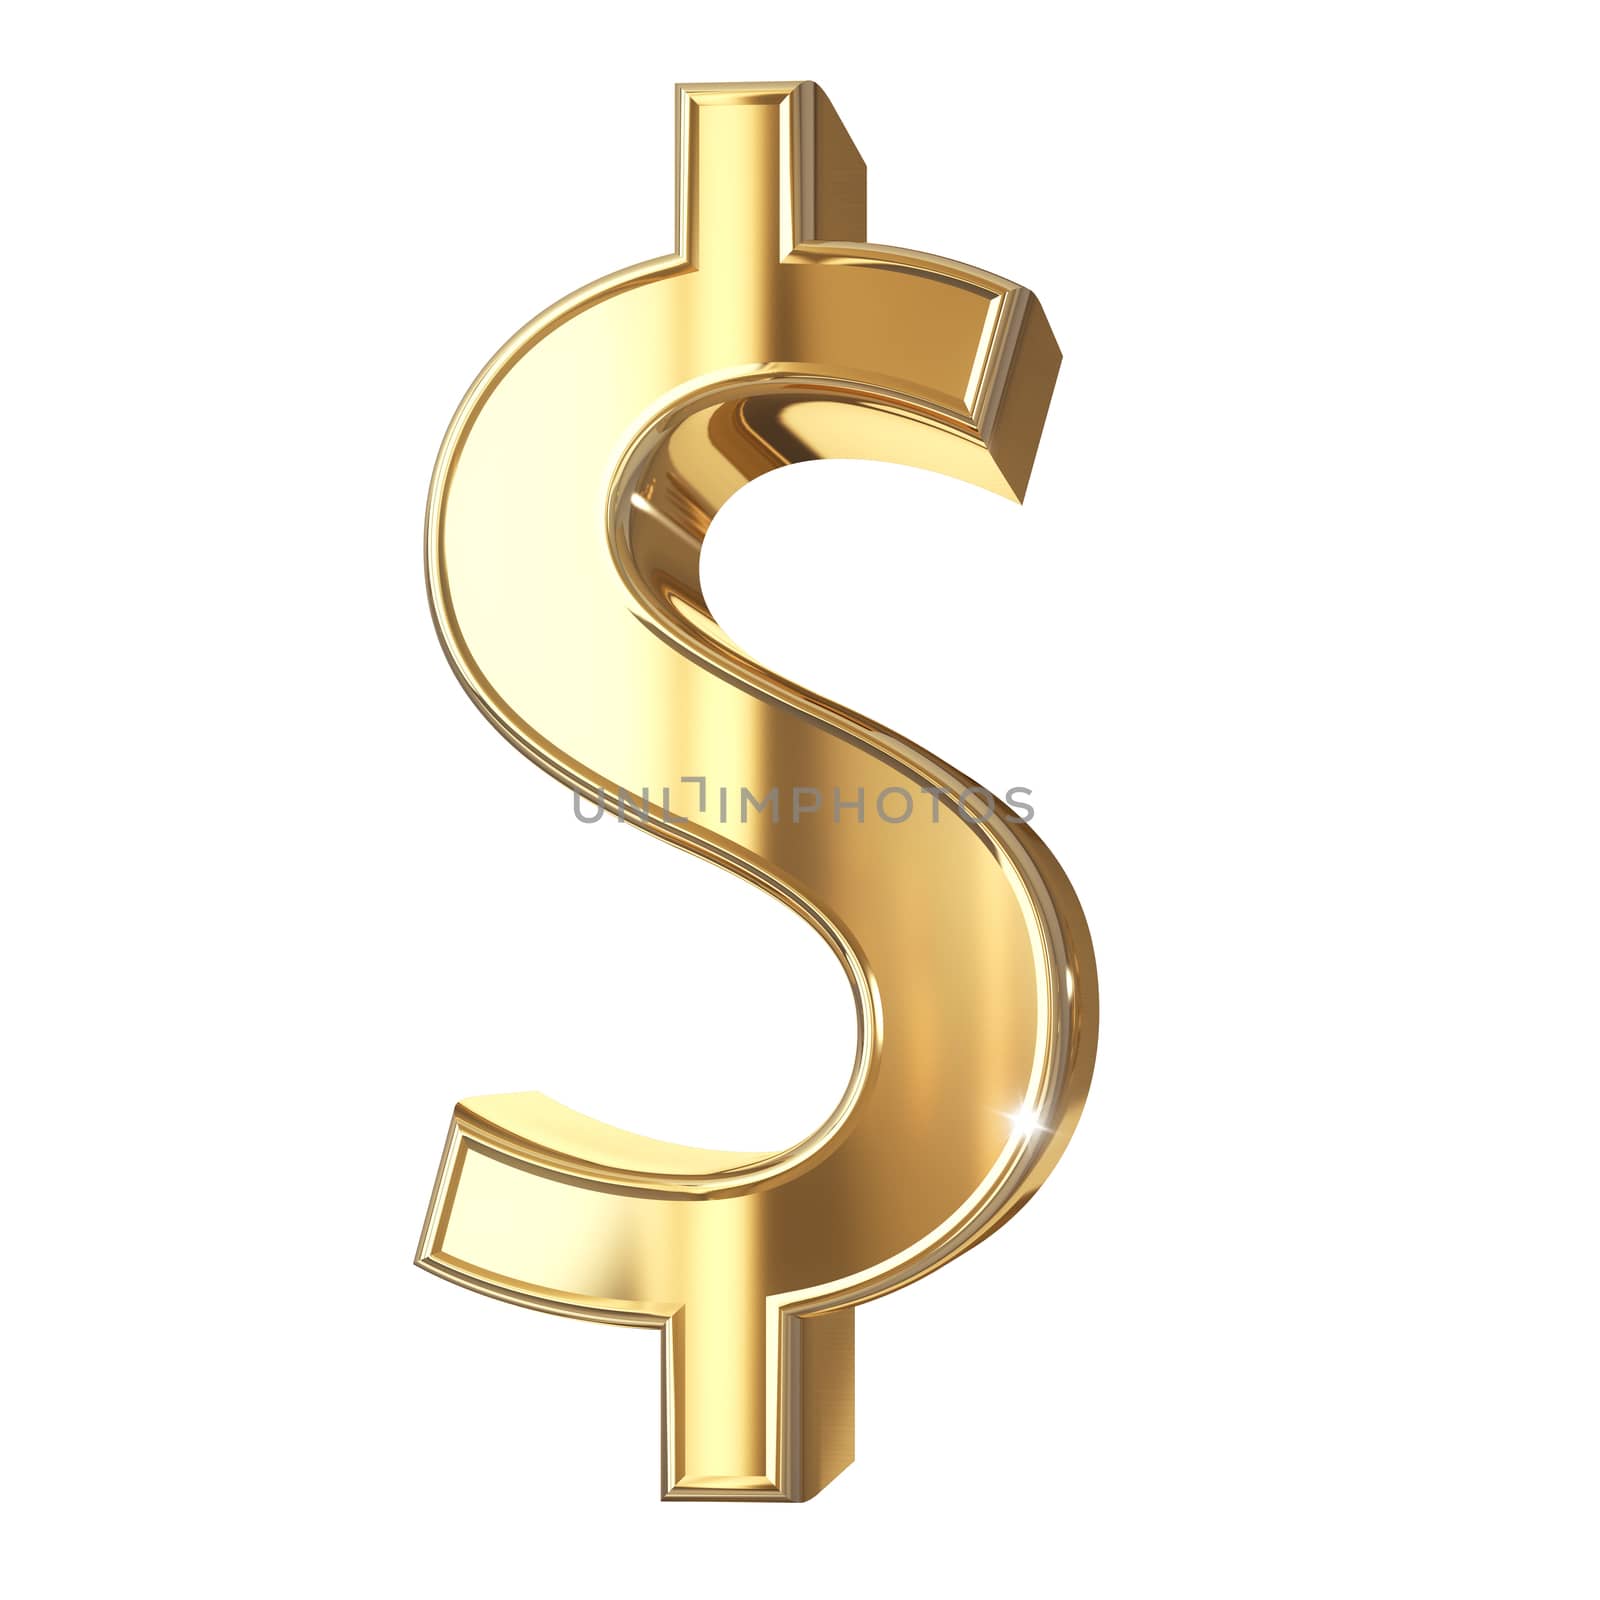 Golden 3D dollar symbol with clipping path isolated on white background